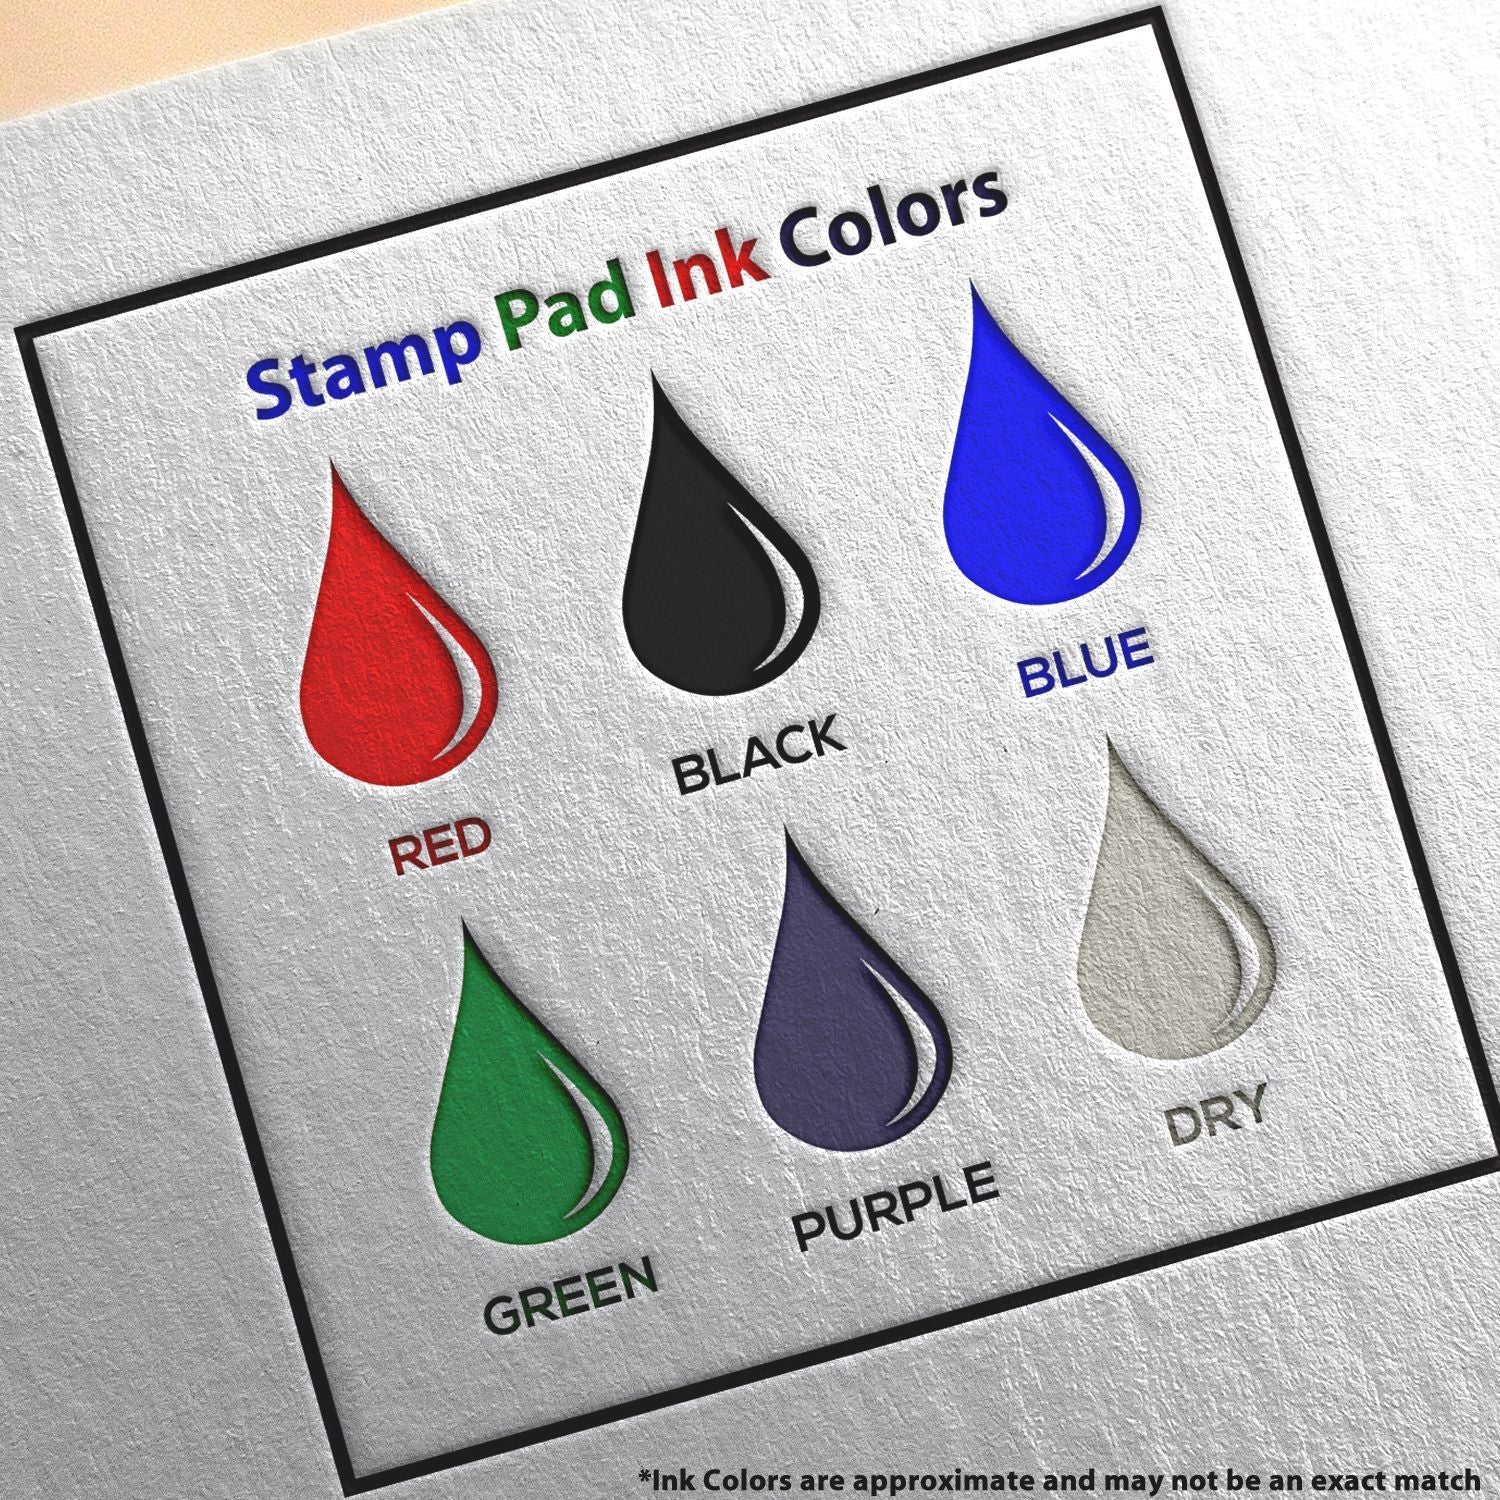 One Color Replacement Ink Pad For Hm 6107 E 907 E 917 And Hm 6007 Dry